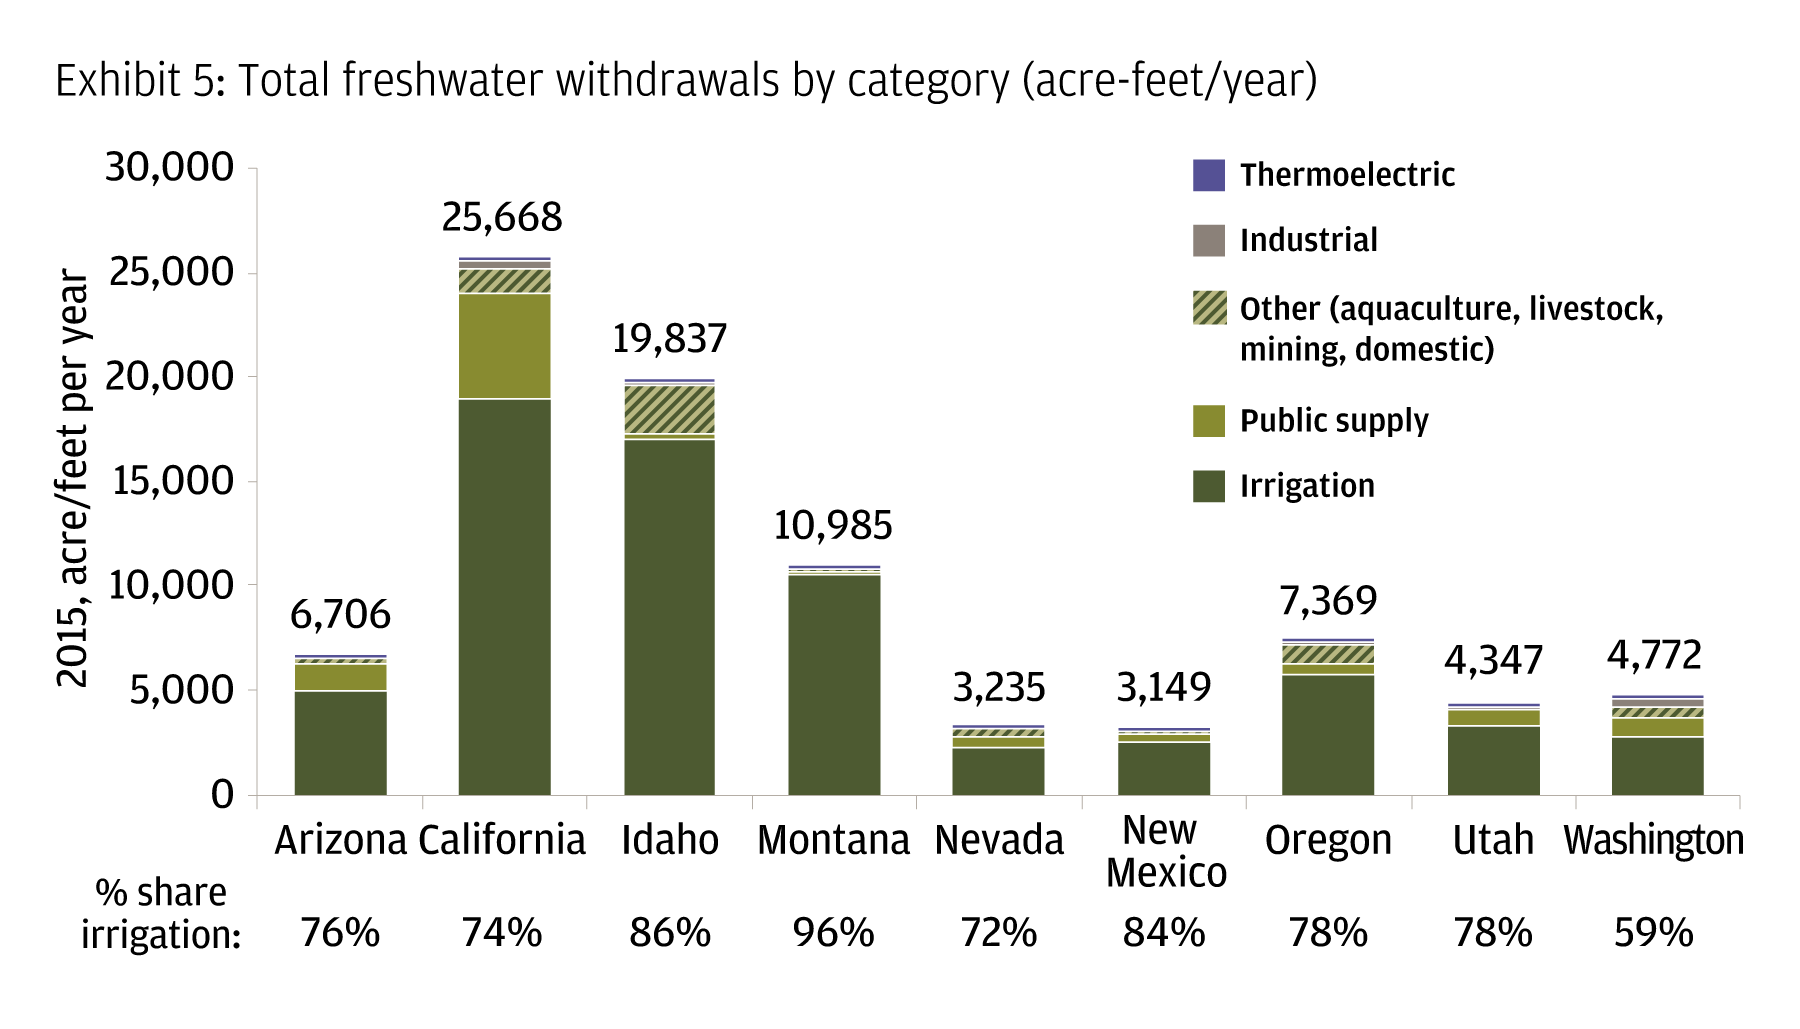 Bar chart shows nine western states’ water use: Almost all to irrigate crops. Tiny amounts (except in California) to go public supply; other uses (industrial, livestock, mining) are minuscule.